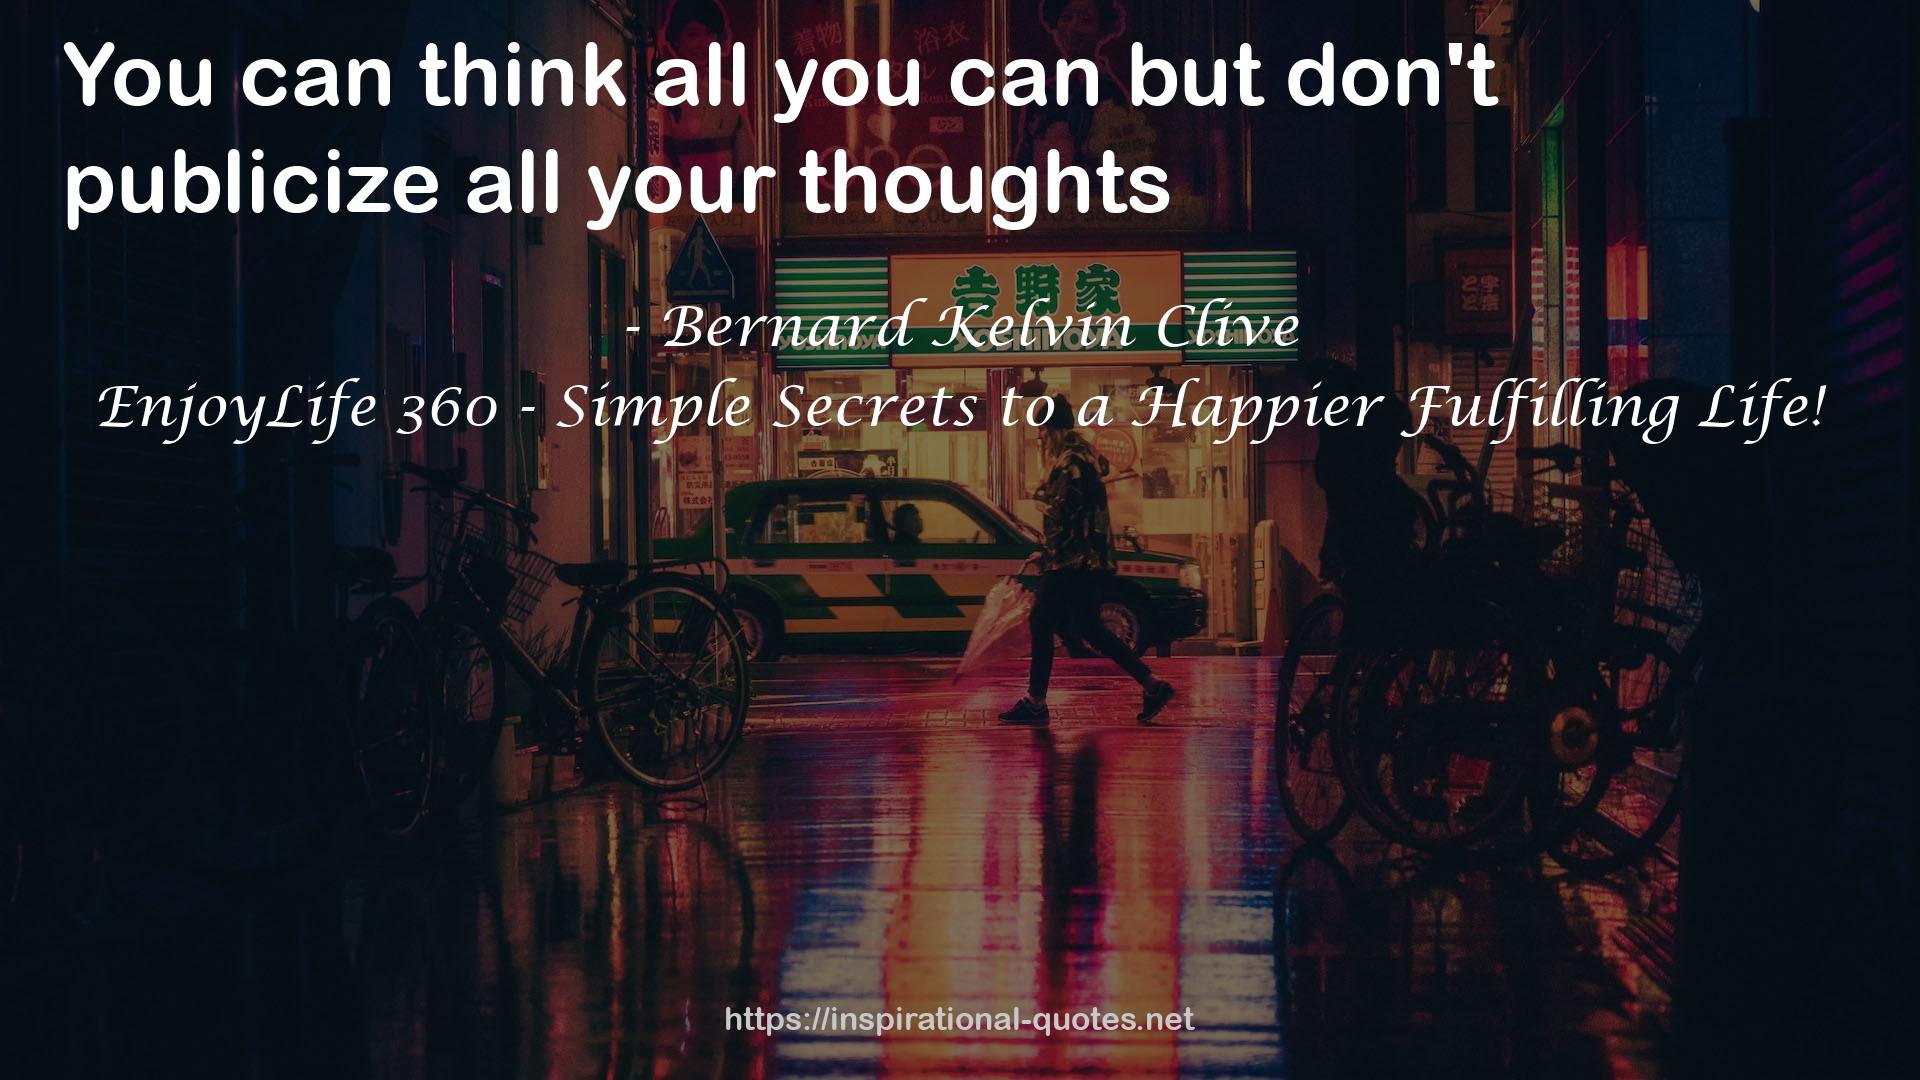 EnjoyLife 360 - Simple Secrets to a Happier Fulfilling Life! QUOTES